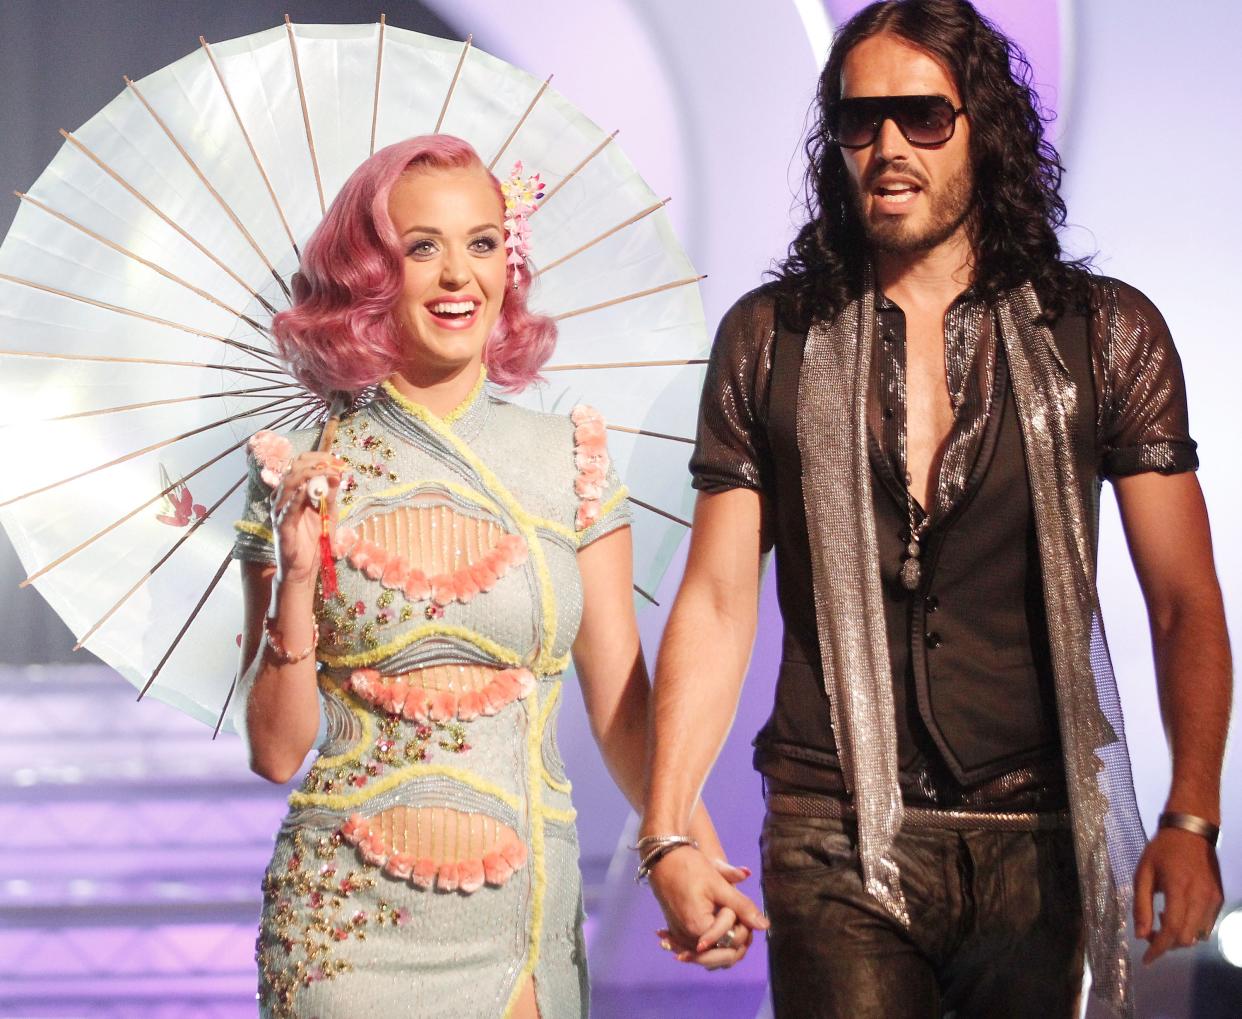 Katy Perry with then-husband Russell Brand at the 2011 MTV VMAs (Getty Images)